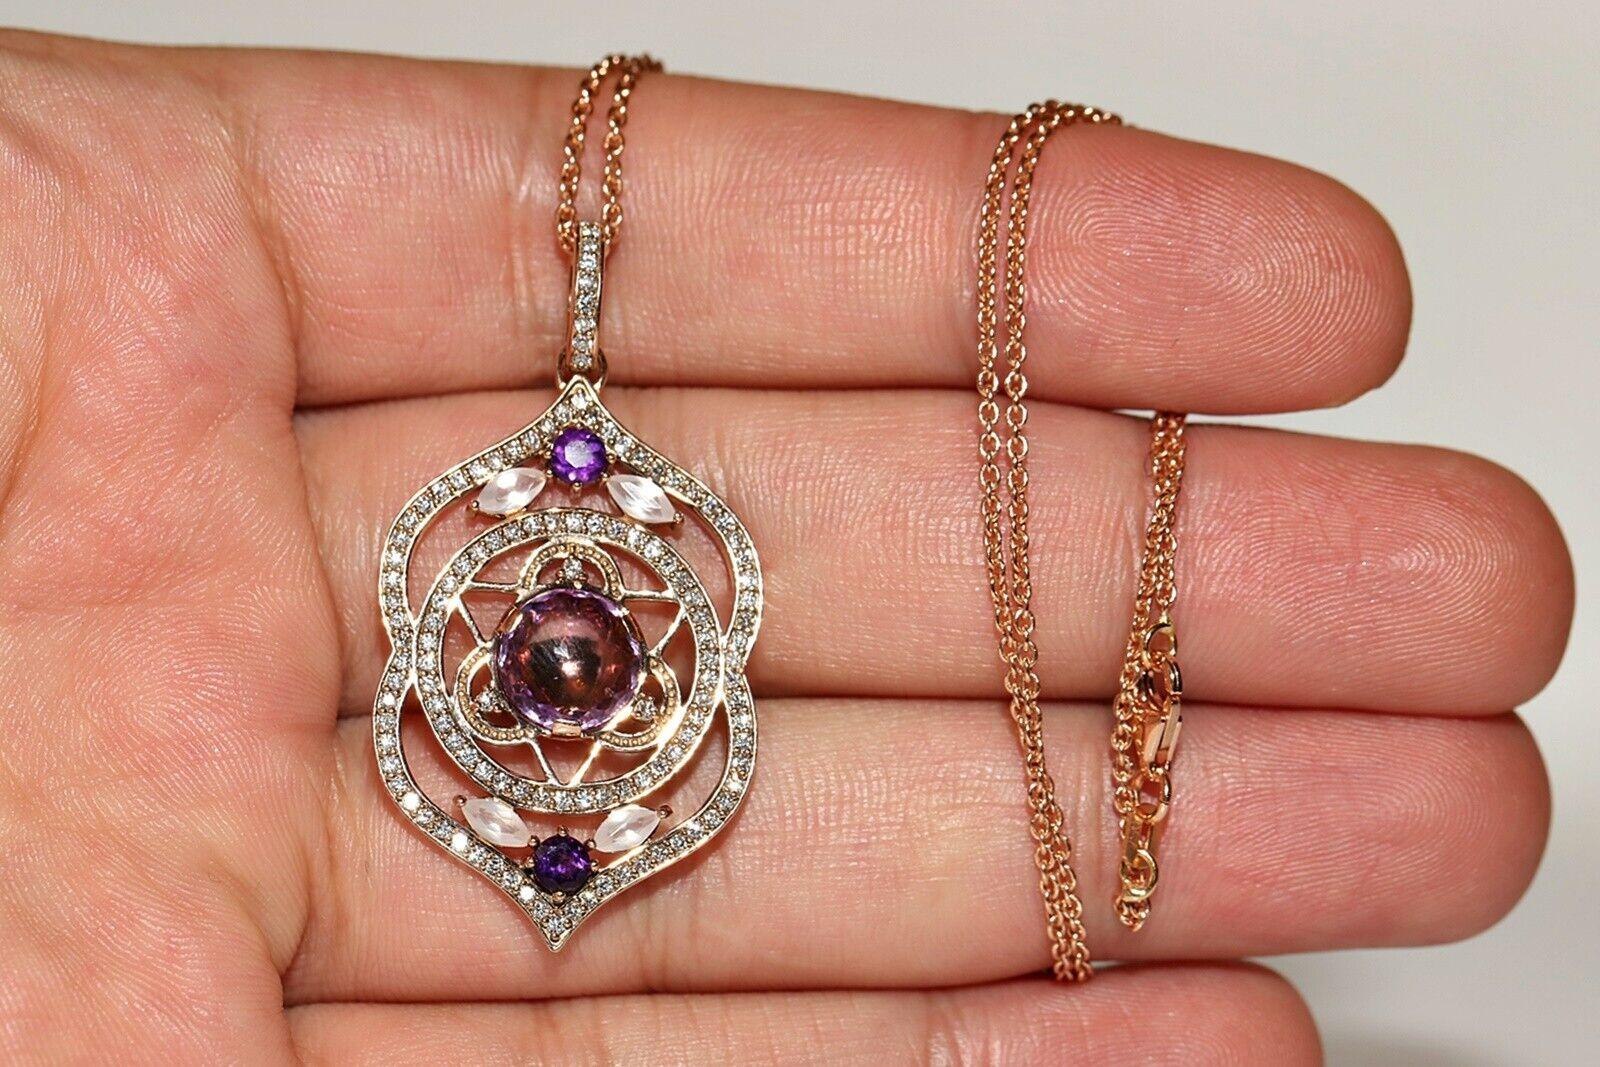 18k Gold Natural Diamond And Amethyst Decrated Pretty Pendant Necklace For Sale 5